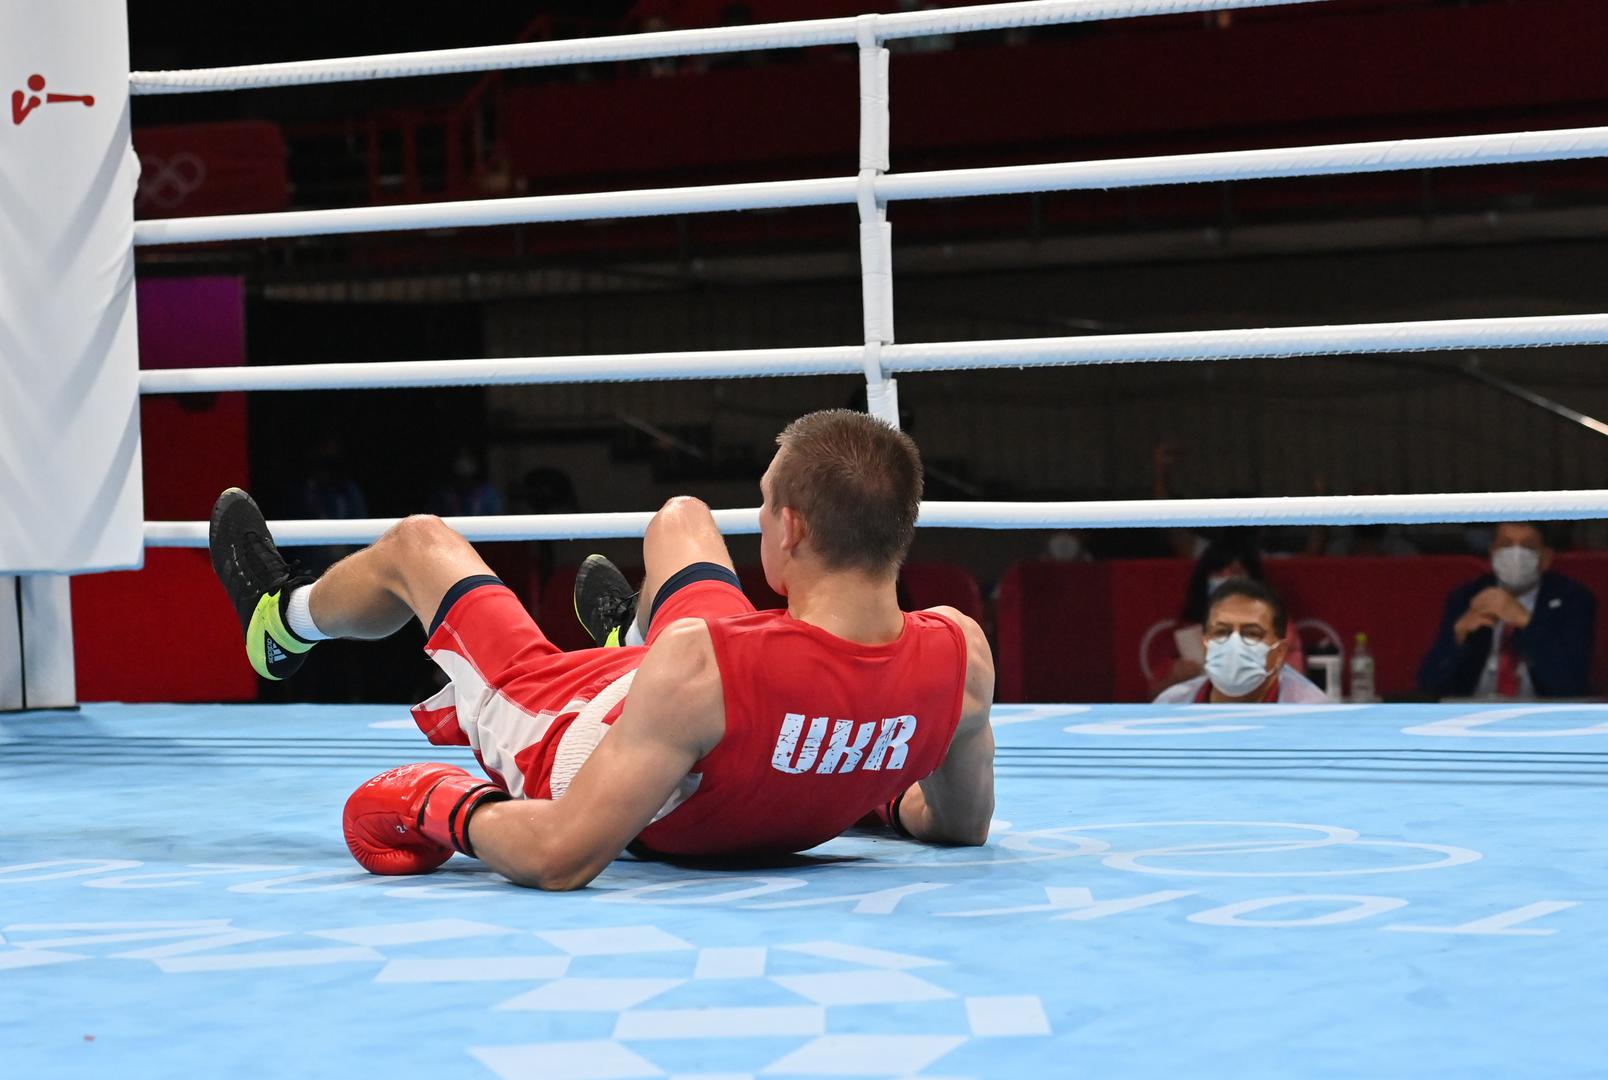 Boxing - Men's Middleweight - Final Tokyo 2020 Olympics - Boxing - Men's Middleweight - Final - Kokugikan Arena - Tokyo, Japan - August 7, 2021. Oleksandr Khyzhniak of Ukraine lies on the ground after being knocked down during his fight against Hebert Sousa of Brazil Pool via REUTERS/Luis Robayo LUIS ROBAYO